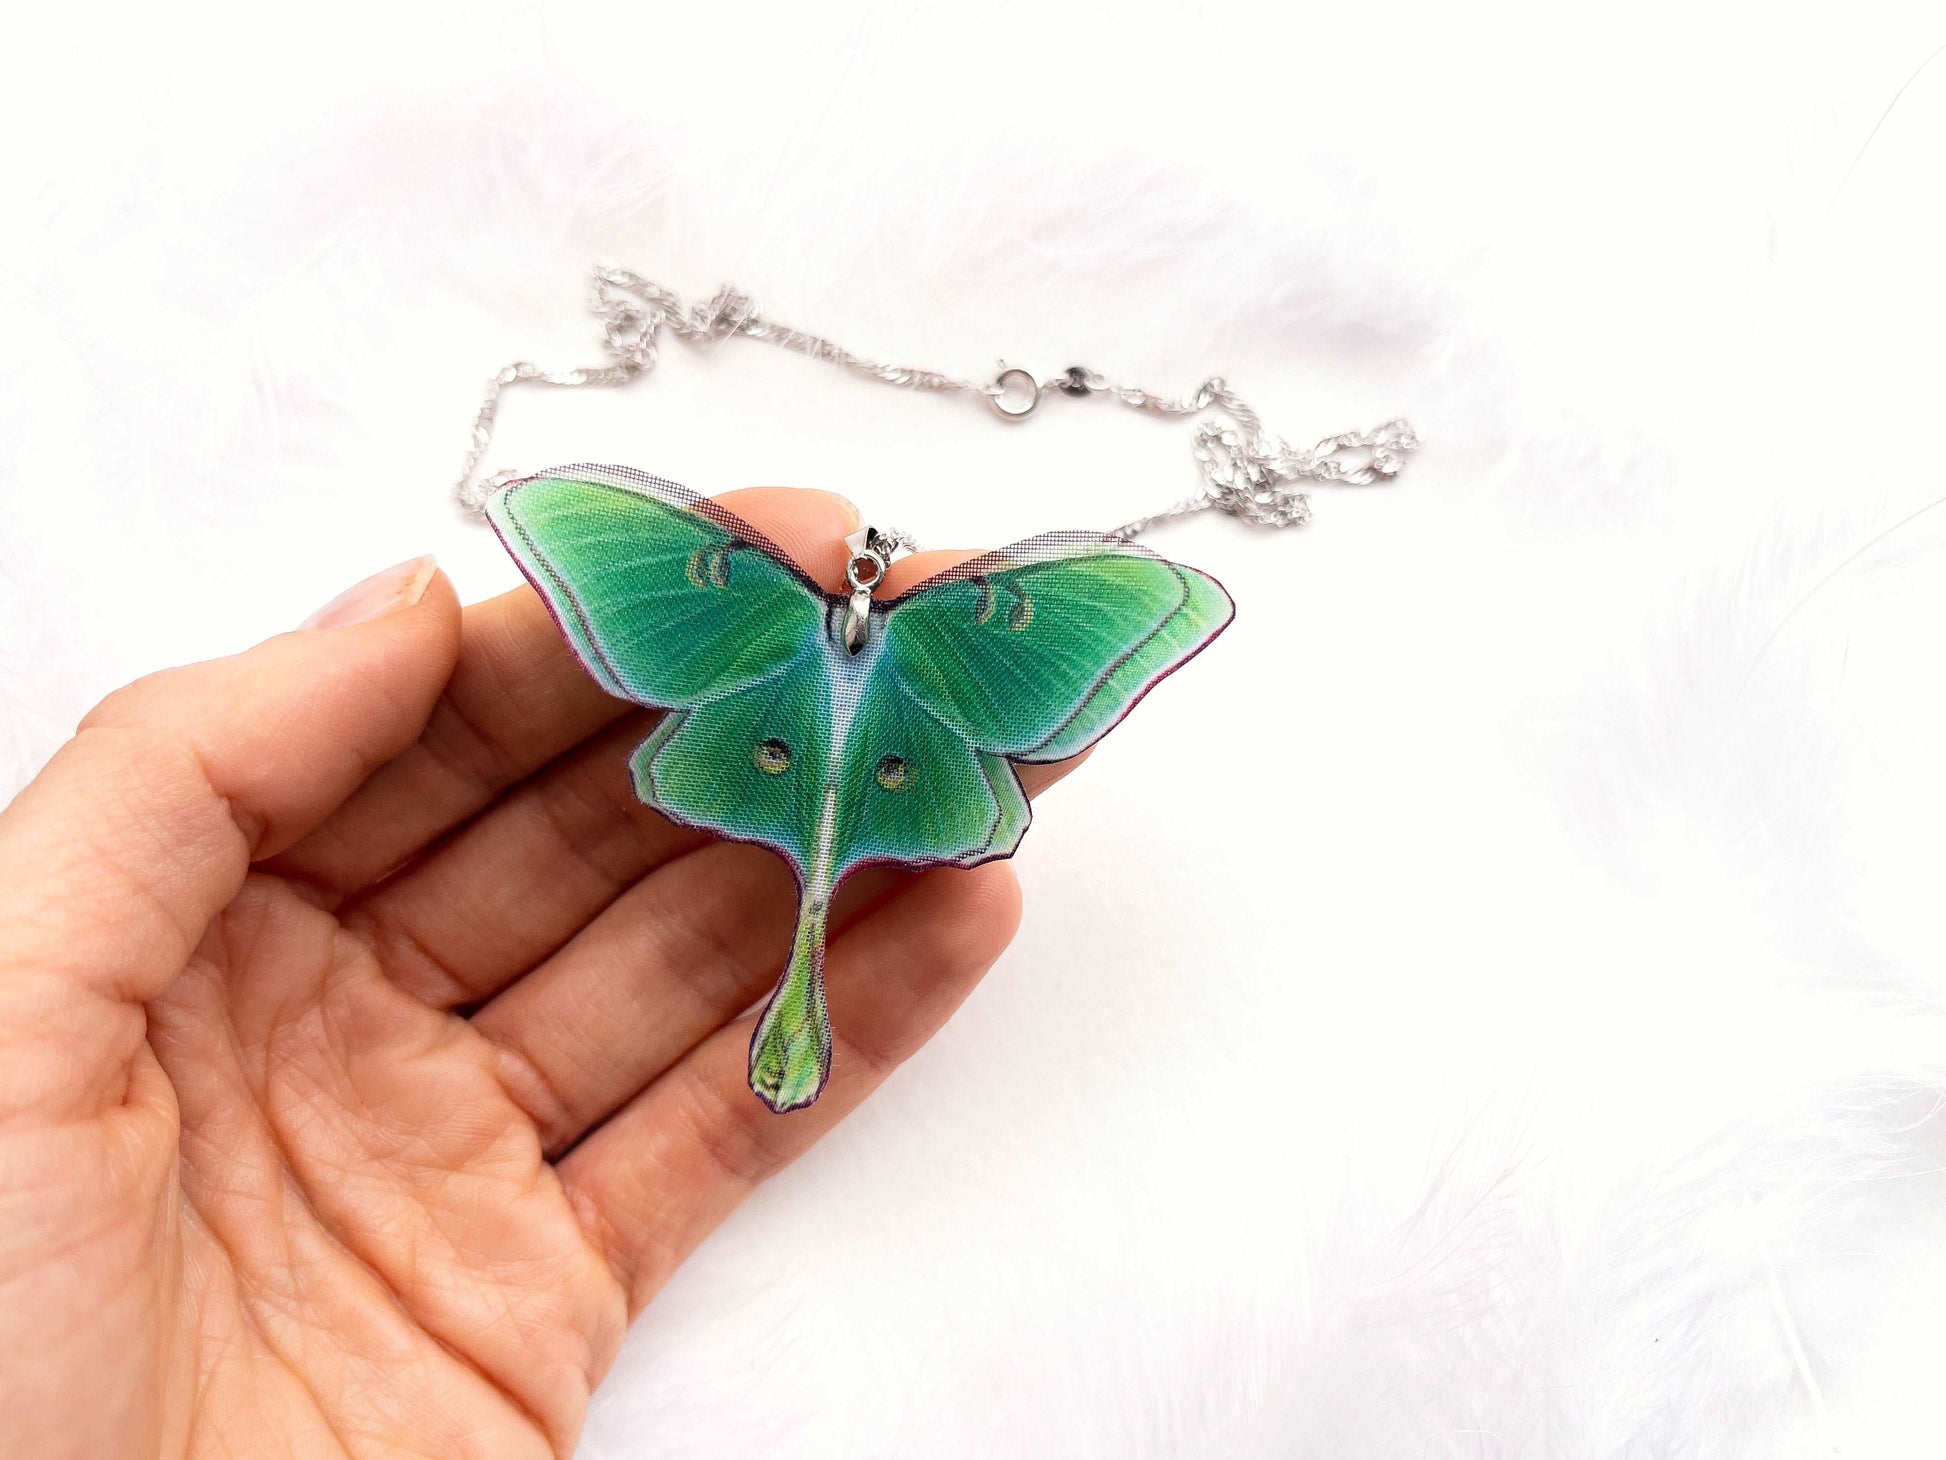 Handcrafted Green Lunar Moth Pendant on a delicate silver chain - Eco-friendly nature-inspired jewelry for fashion-conscious women